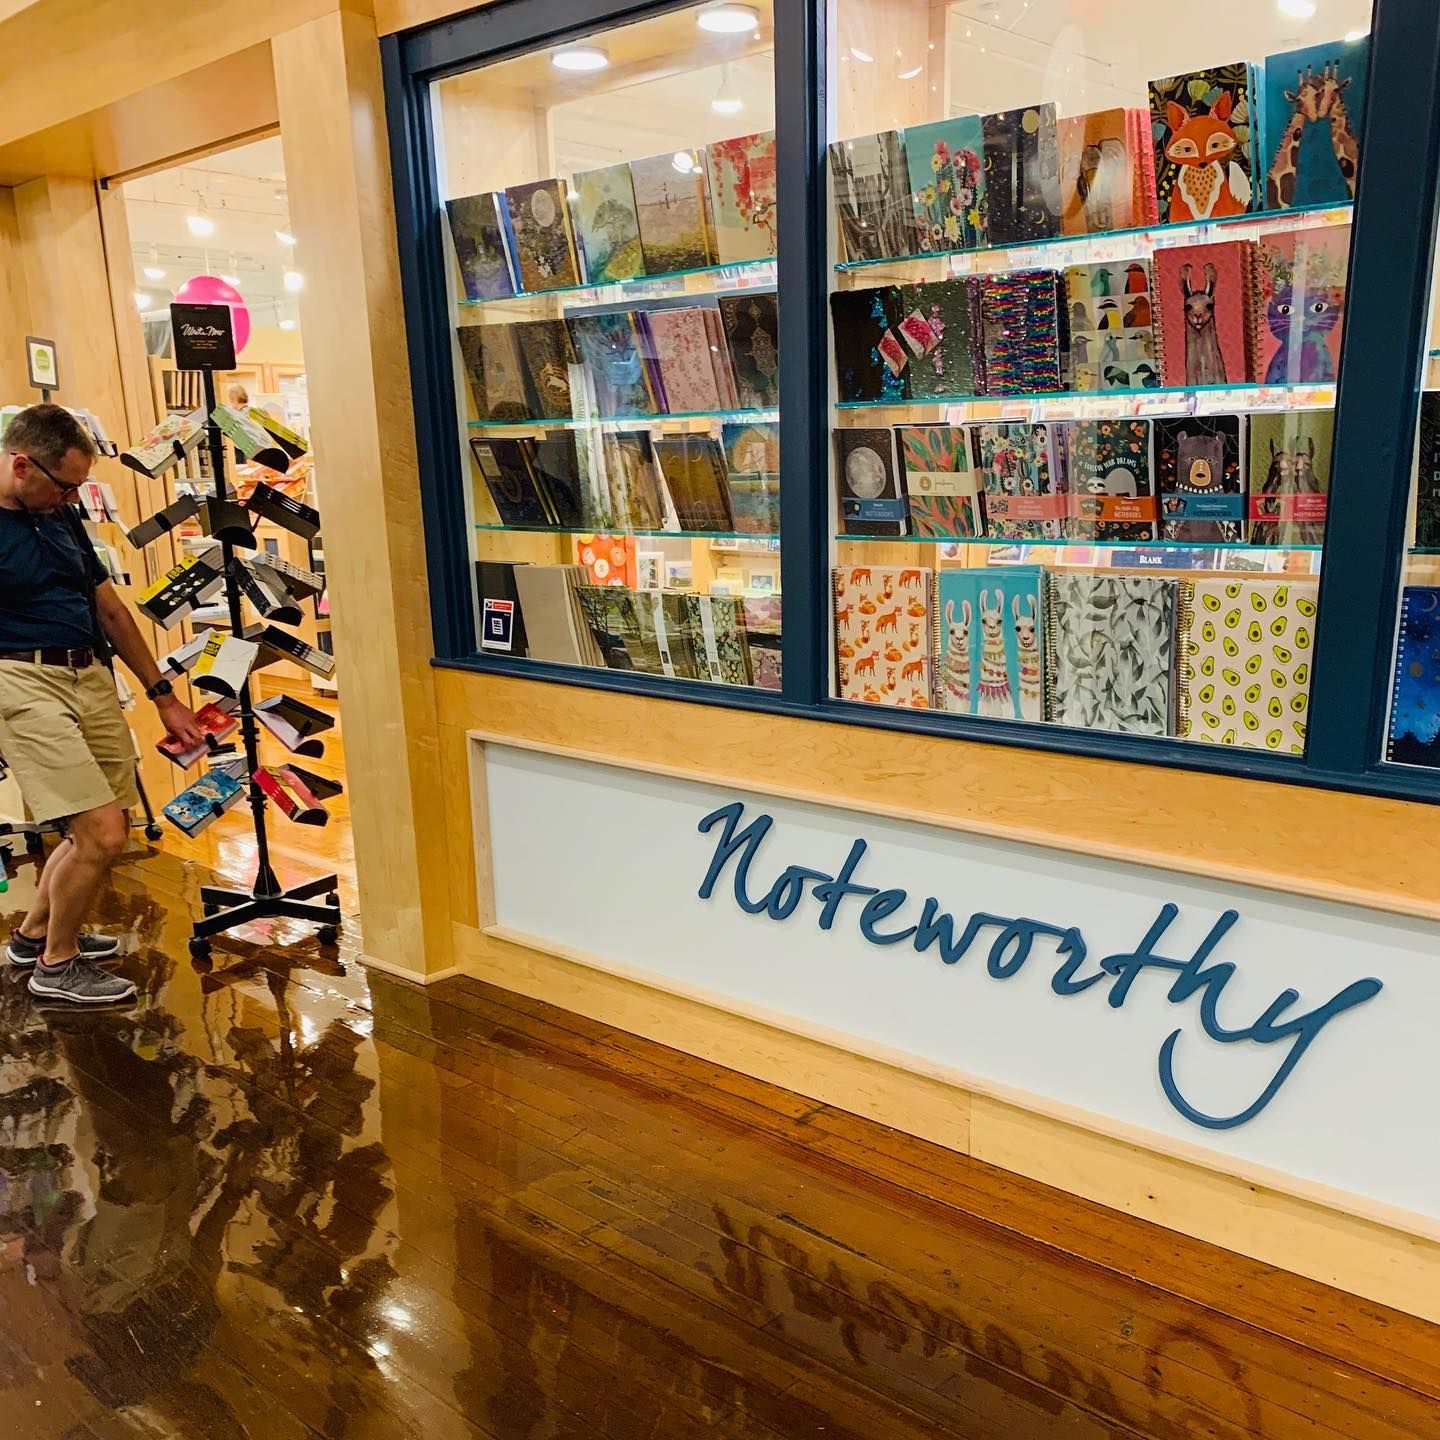 Noteworthy in Thornes sells an array of goods, from greeting cards to journals to arts & crafts goodies.